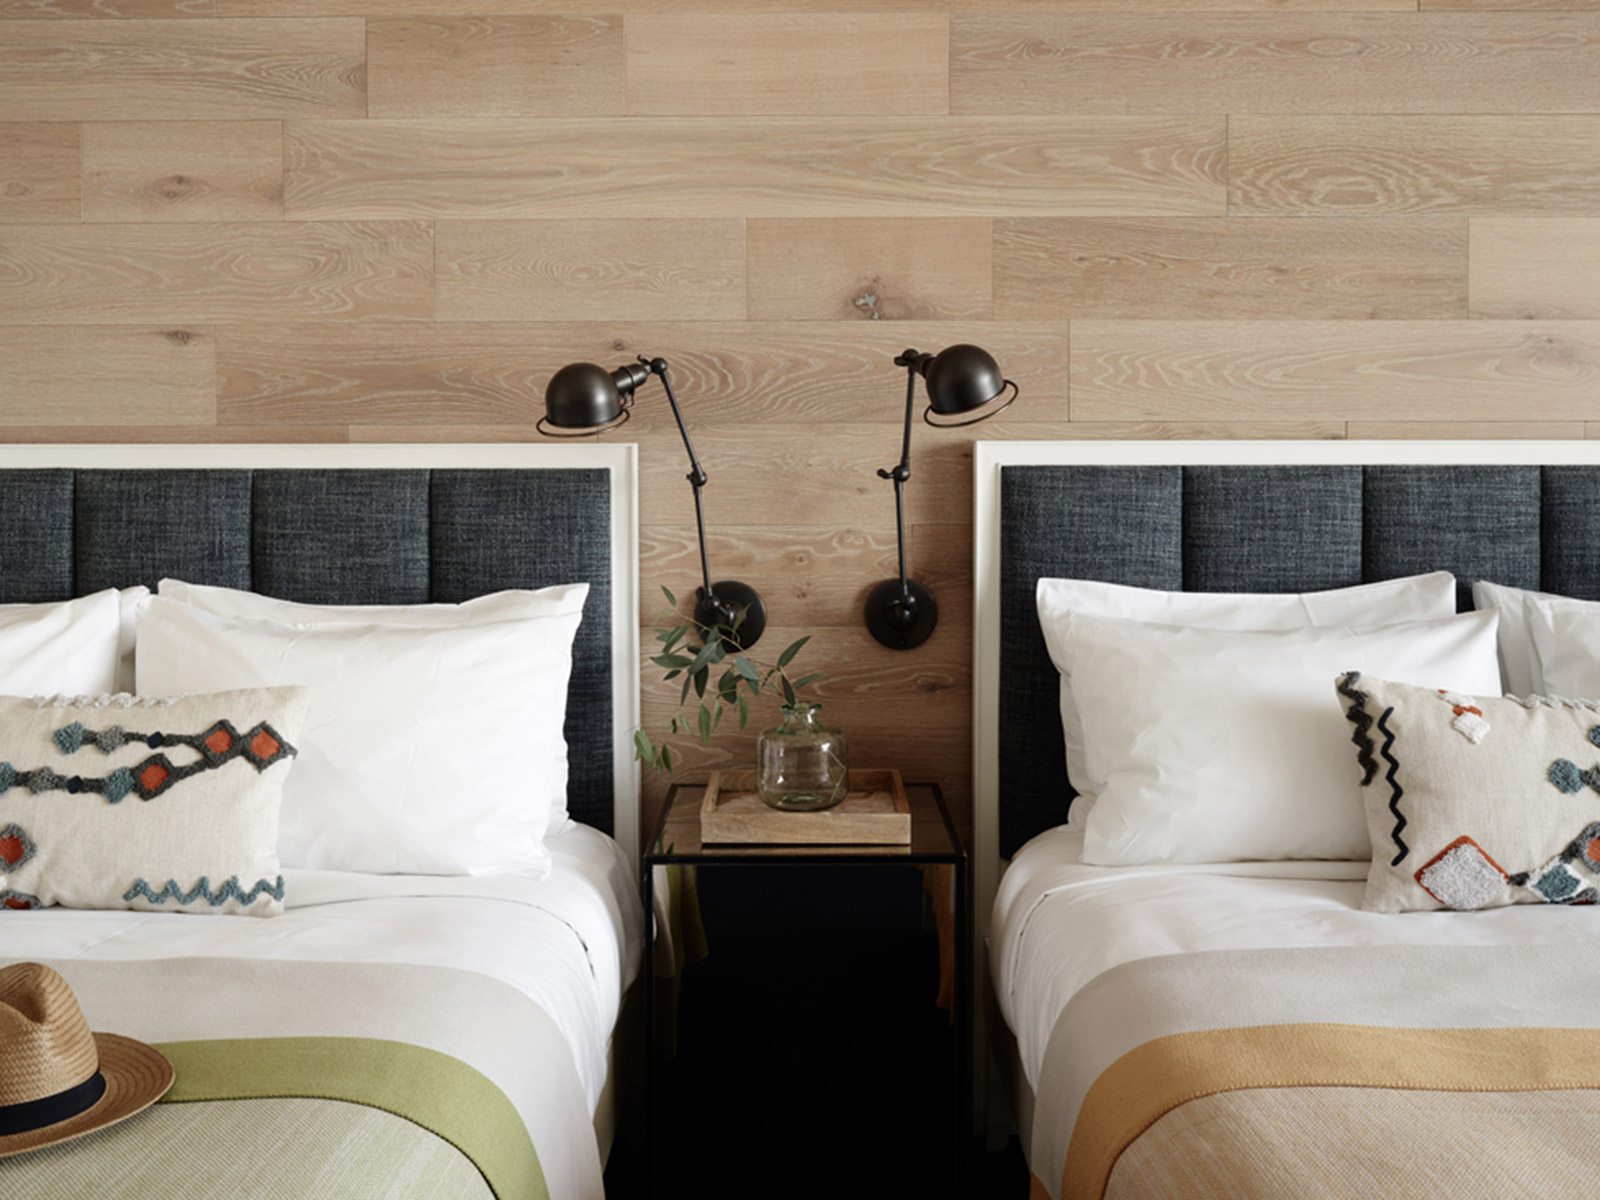 Two queen beds with blue texture headboards, wood wall, black sconces and a woven hat